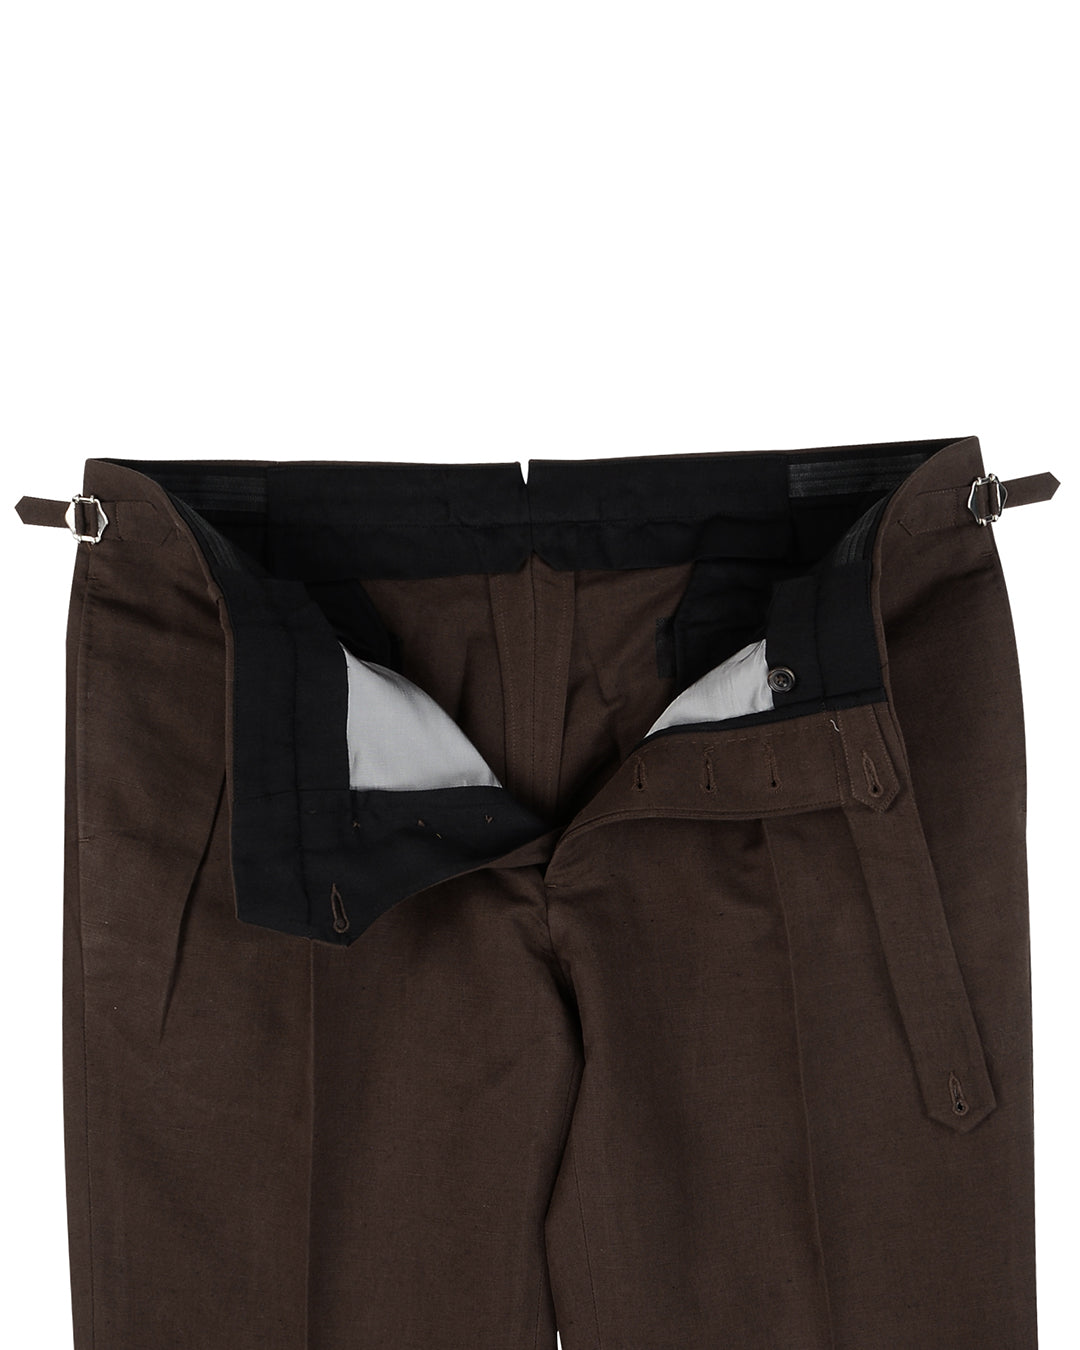 Open front view of custom linen chino pants for men by Luxire in brown